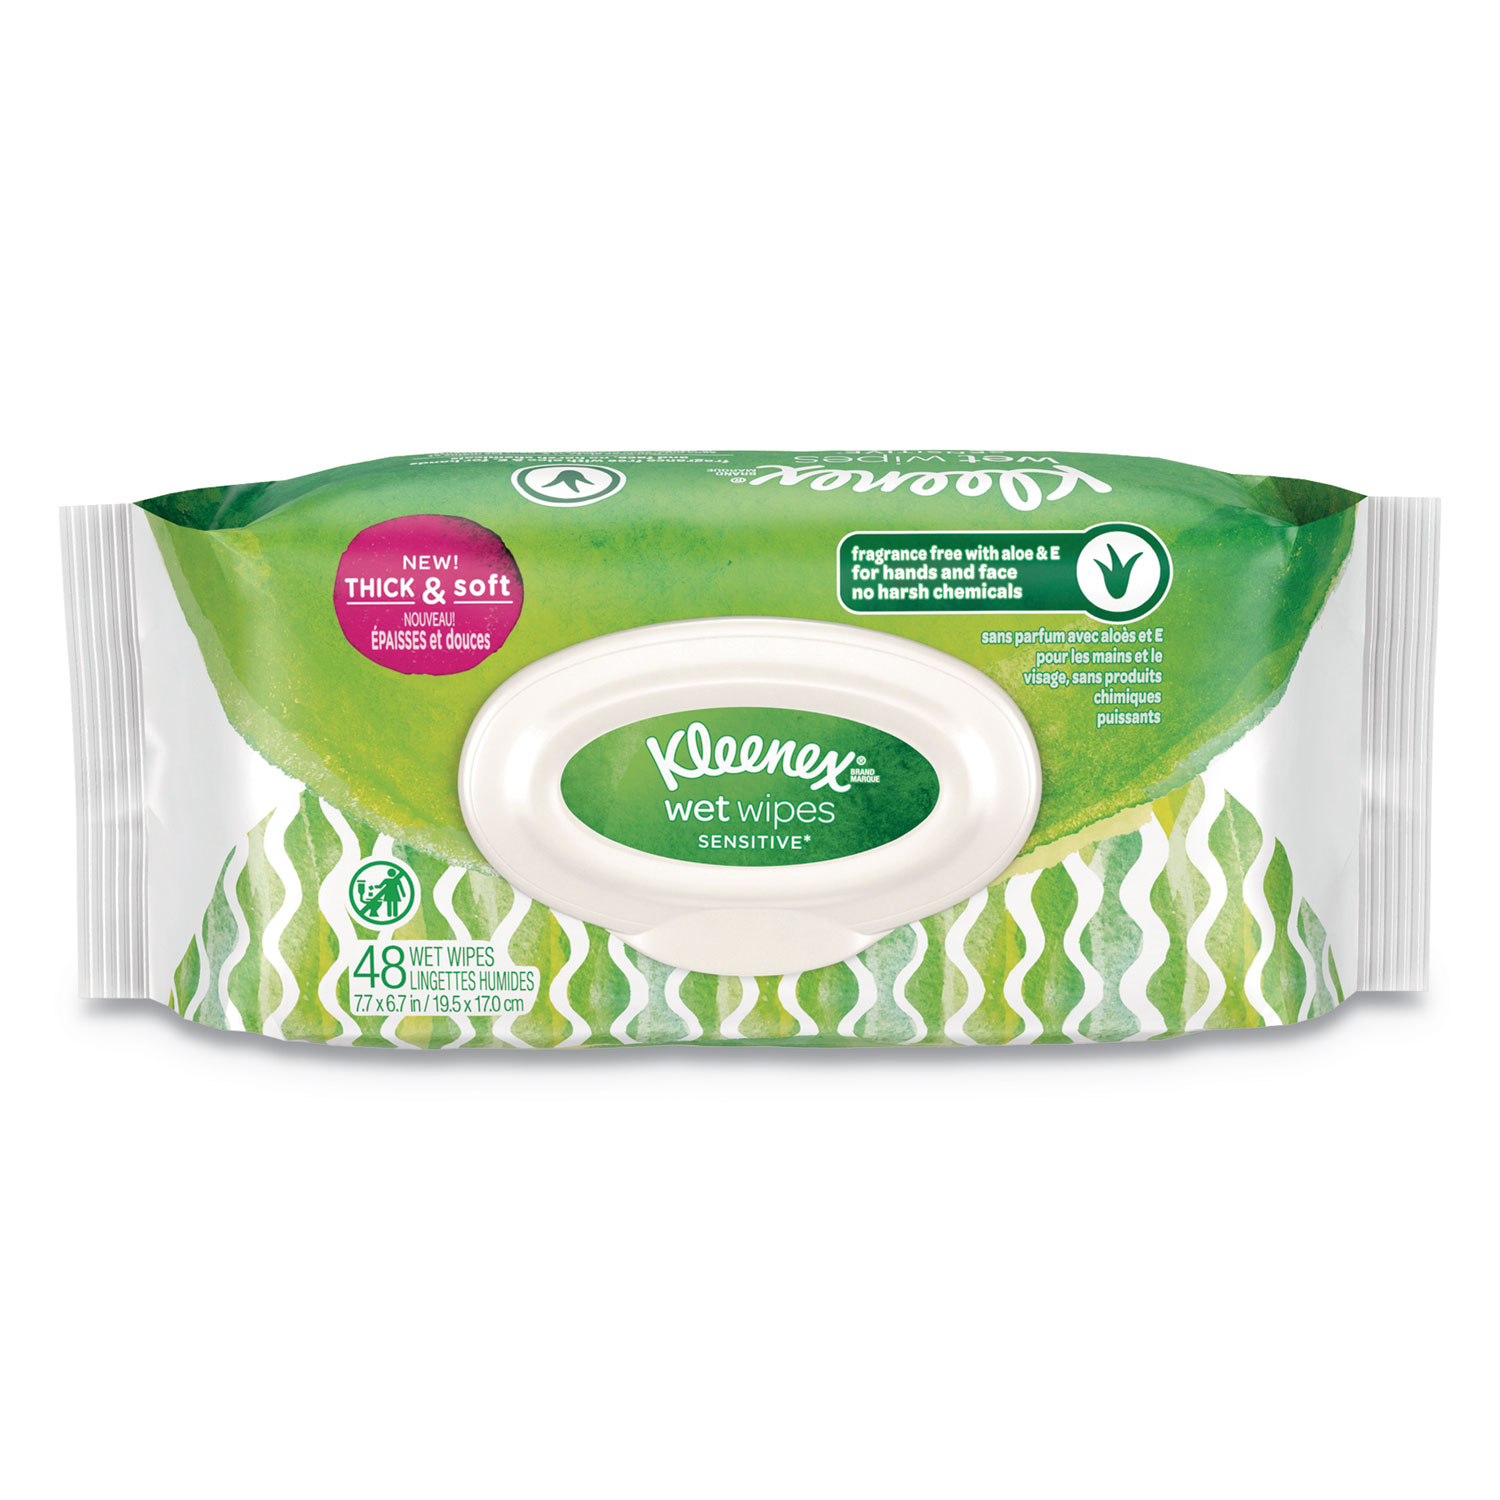  Kleenex 47781 Wet Wipes Sensitive with Aloe/Vitamin E for Hands/Face, 6.7 x 7.7, 48 Wipes/Pack (KCC47781) 